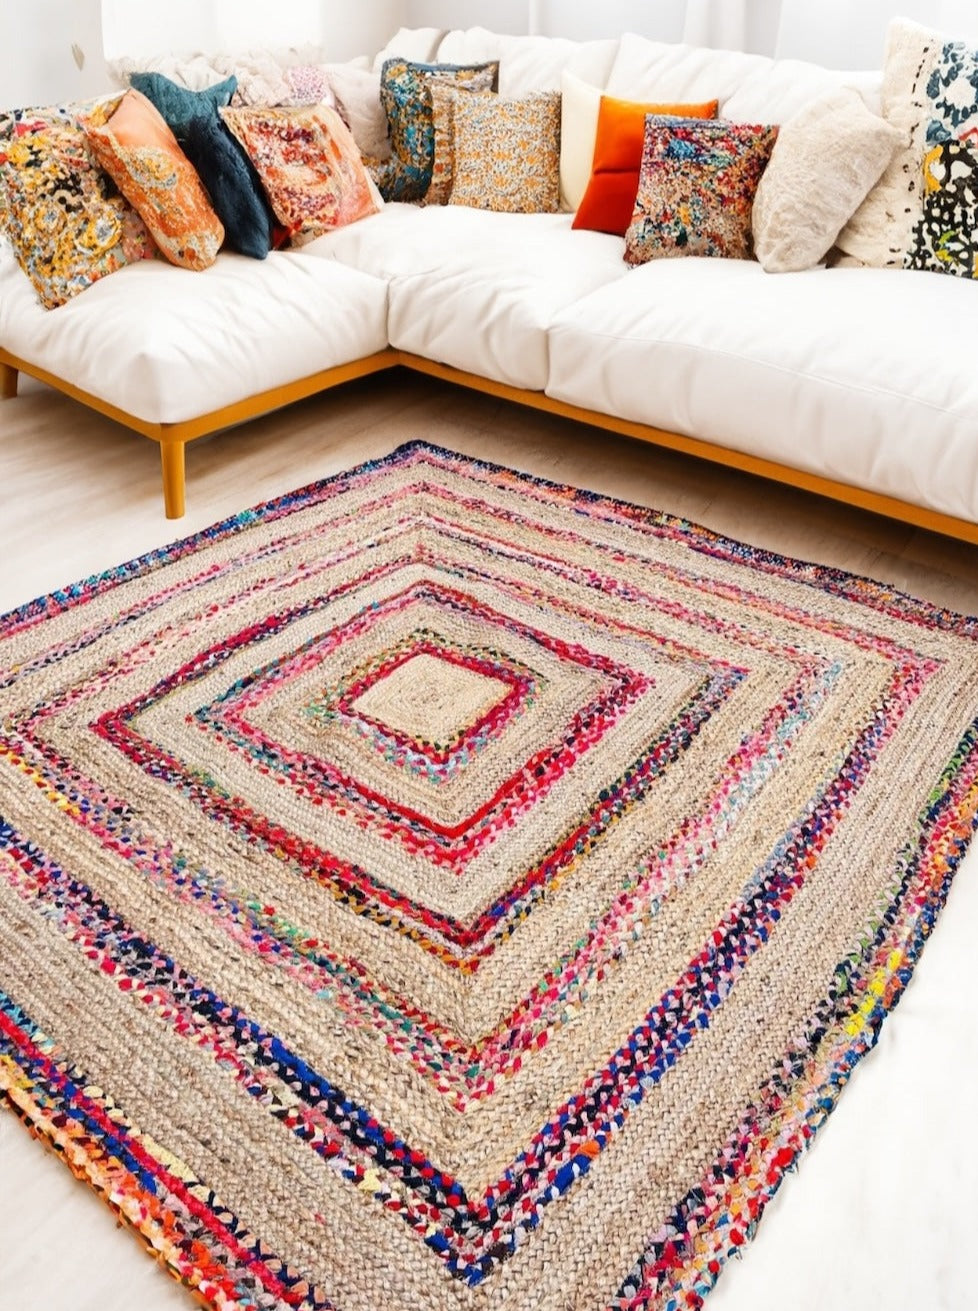 Square Fiesta Natural Jute Rug And Hand Woven Mixed Rainbow Fabric Second Nature Online